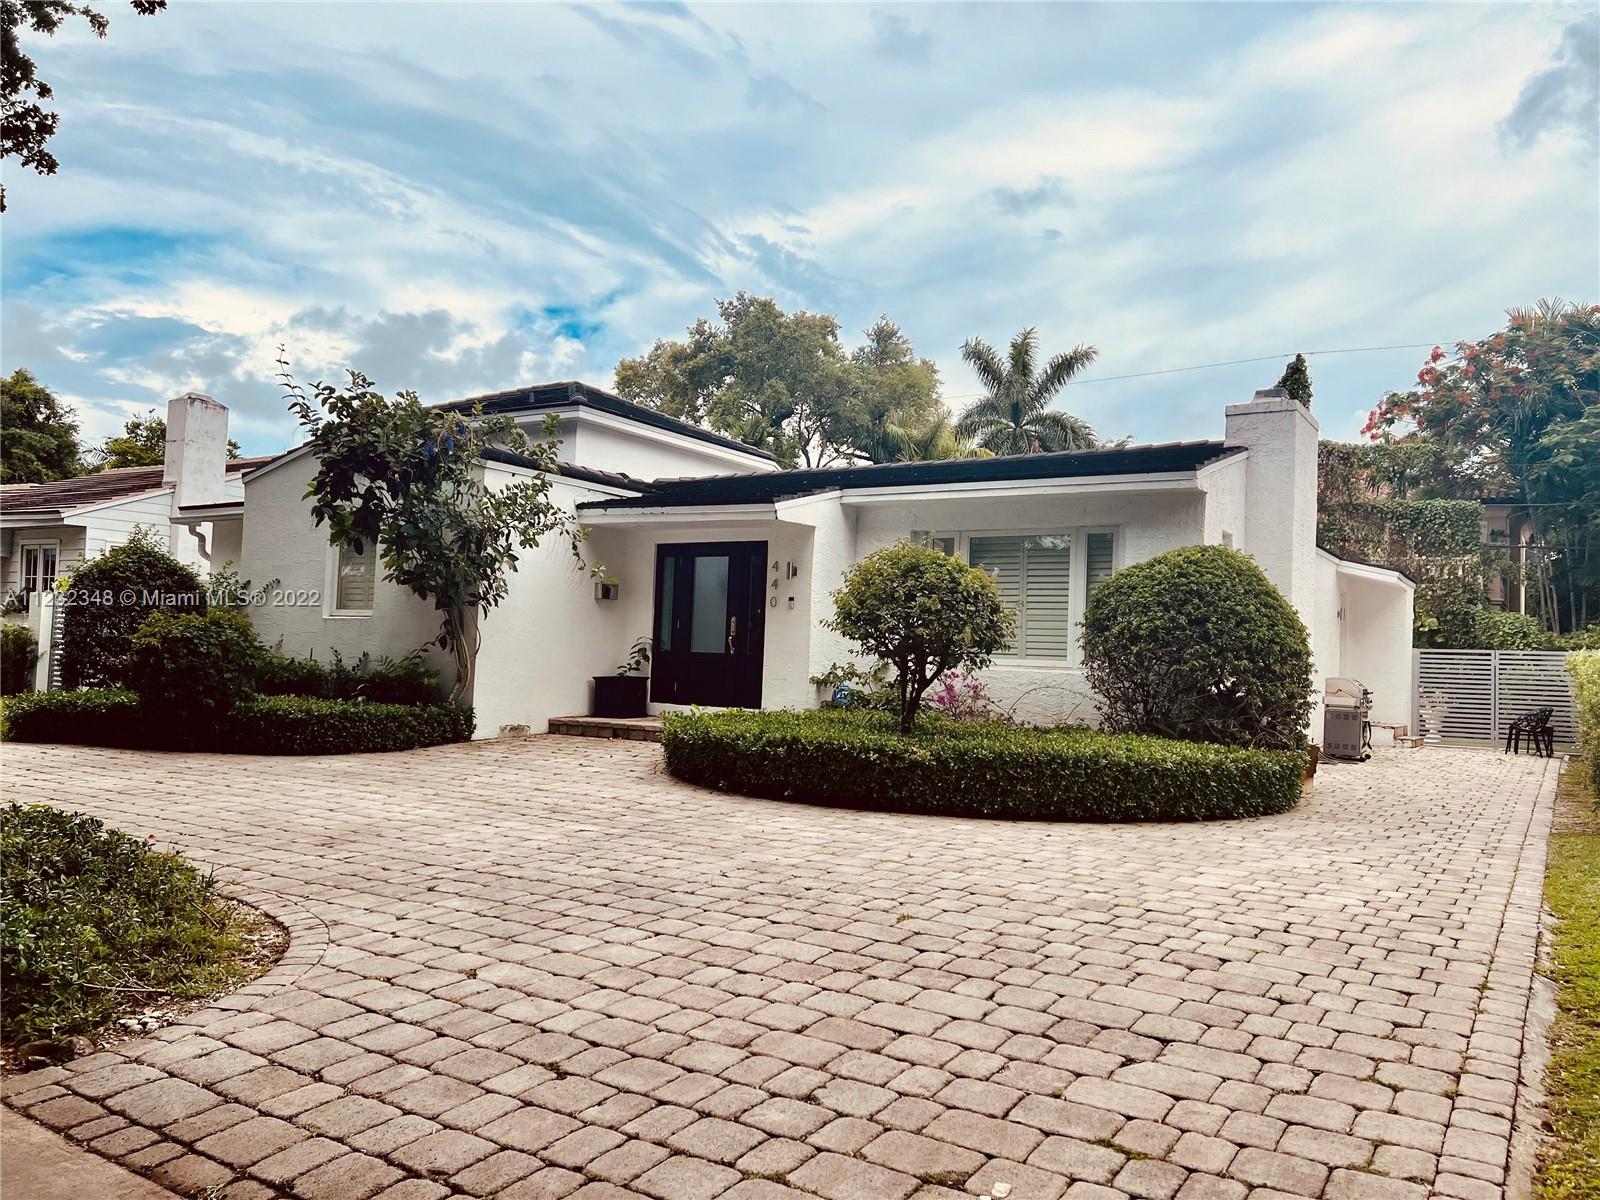 This Coral Gables Charming home is truly a must see! 3 bed/2.5 baths in a beautiful charming tree hugging road(Zamora). This 1940s home has recently been updated, boasting of new construction (880) additional adj sq feet approved & permitted by the City of Coral Gables, a new roof (2020) all updated appliances & even a freestanding tub.  Impact windows and doors throughout home as well as plantation shutters for the same.  Plenty of space for a large pool or just backyard gatherings.  New Master bedroom includes a beautiful loft and a walk-in closet, that promises to be the envy of all your friends.  Master bedroom also includes a laundry room with a side pool bathroom with access to the backyard.  And Lastly, in Coral Gables fashion, a working fireplace to enjoy amongst family & friends.